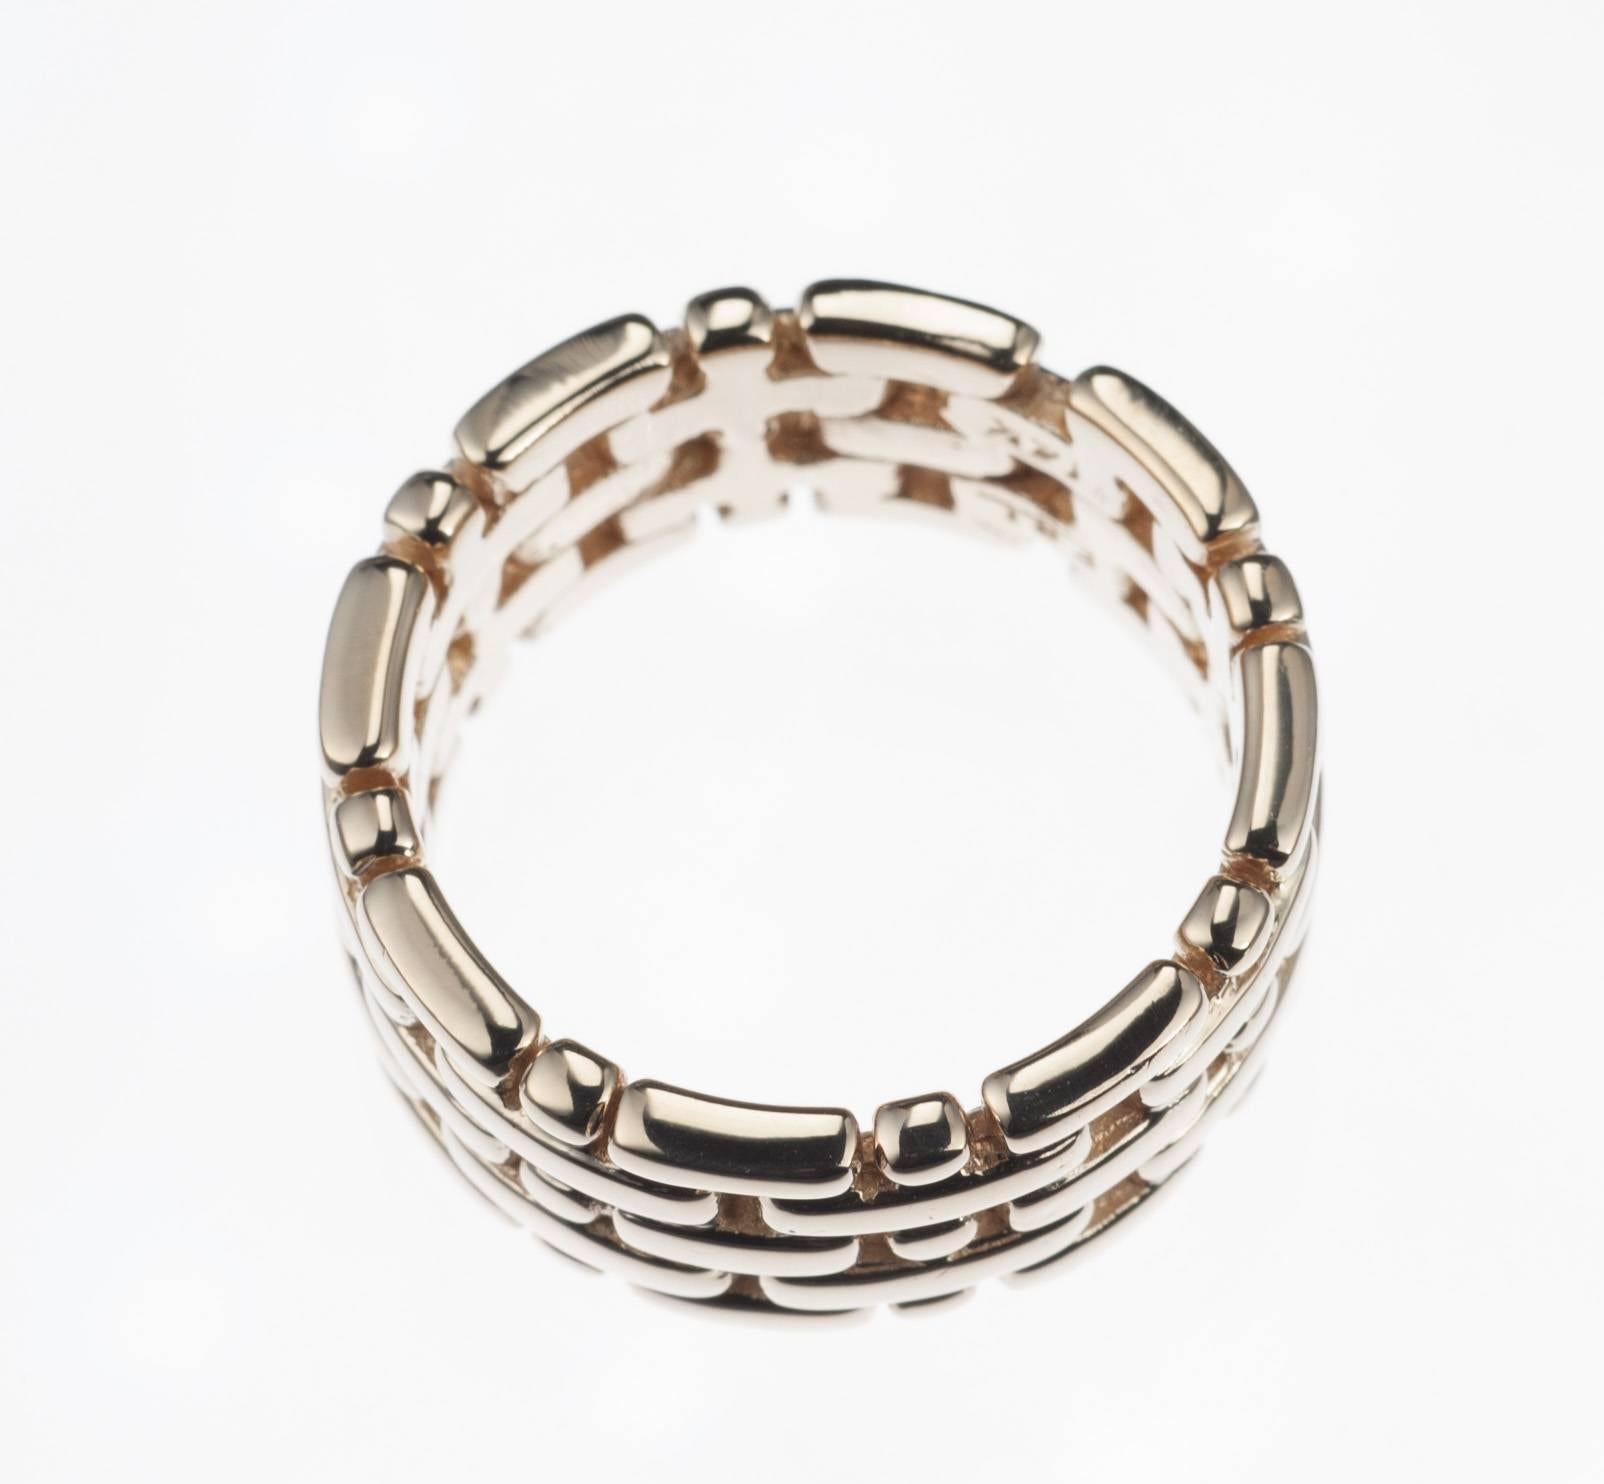 Designed to resemble 5 rows of interlocking links, this 14-karat yellow gold band’s design is universal enough to appeal to both glamourous women and savvy men searching for an eye-catching accessory. Size 6. Measures approx. 0.5” wide.